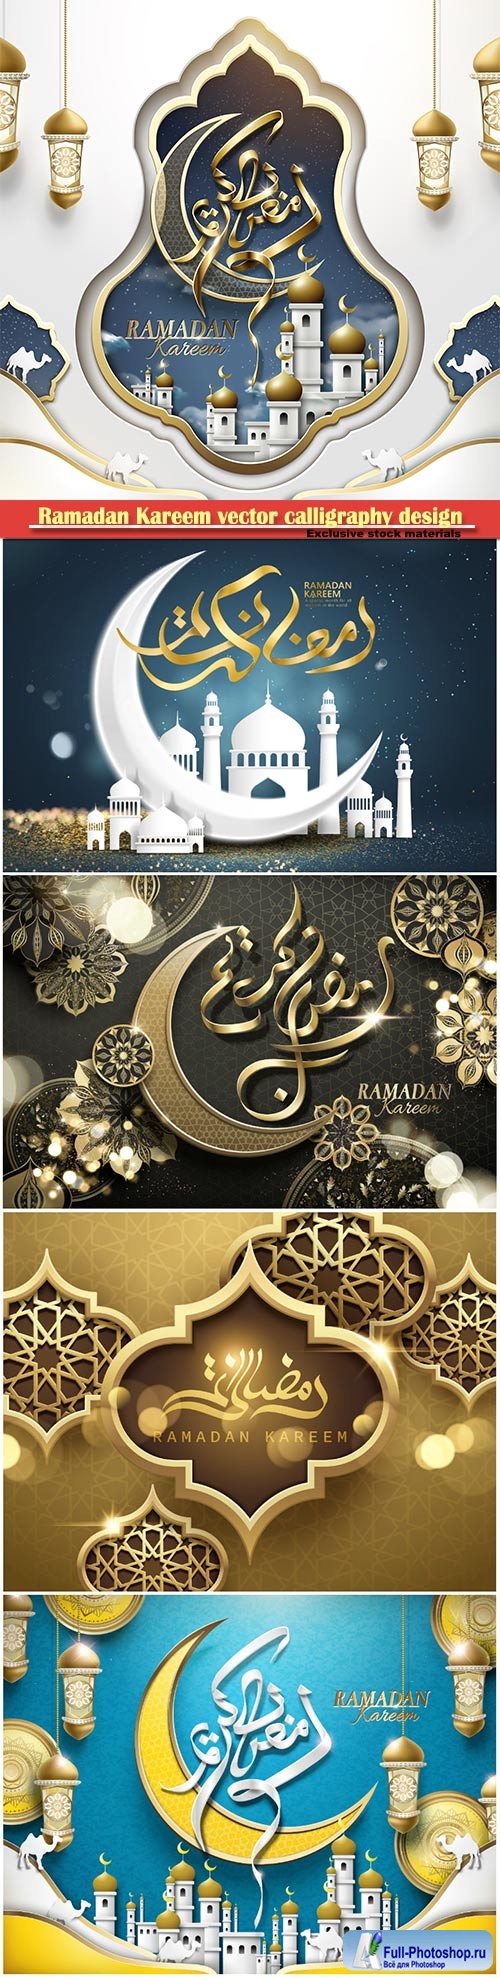 Ramadan Kareem vector calligraphy design with decorative floral pattern,mosque silhouette, crescent and glittering islamic background # 11